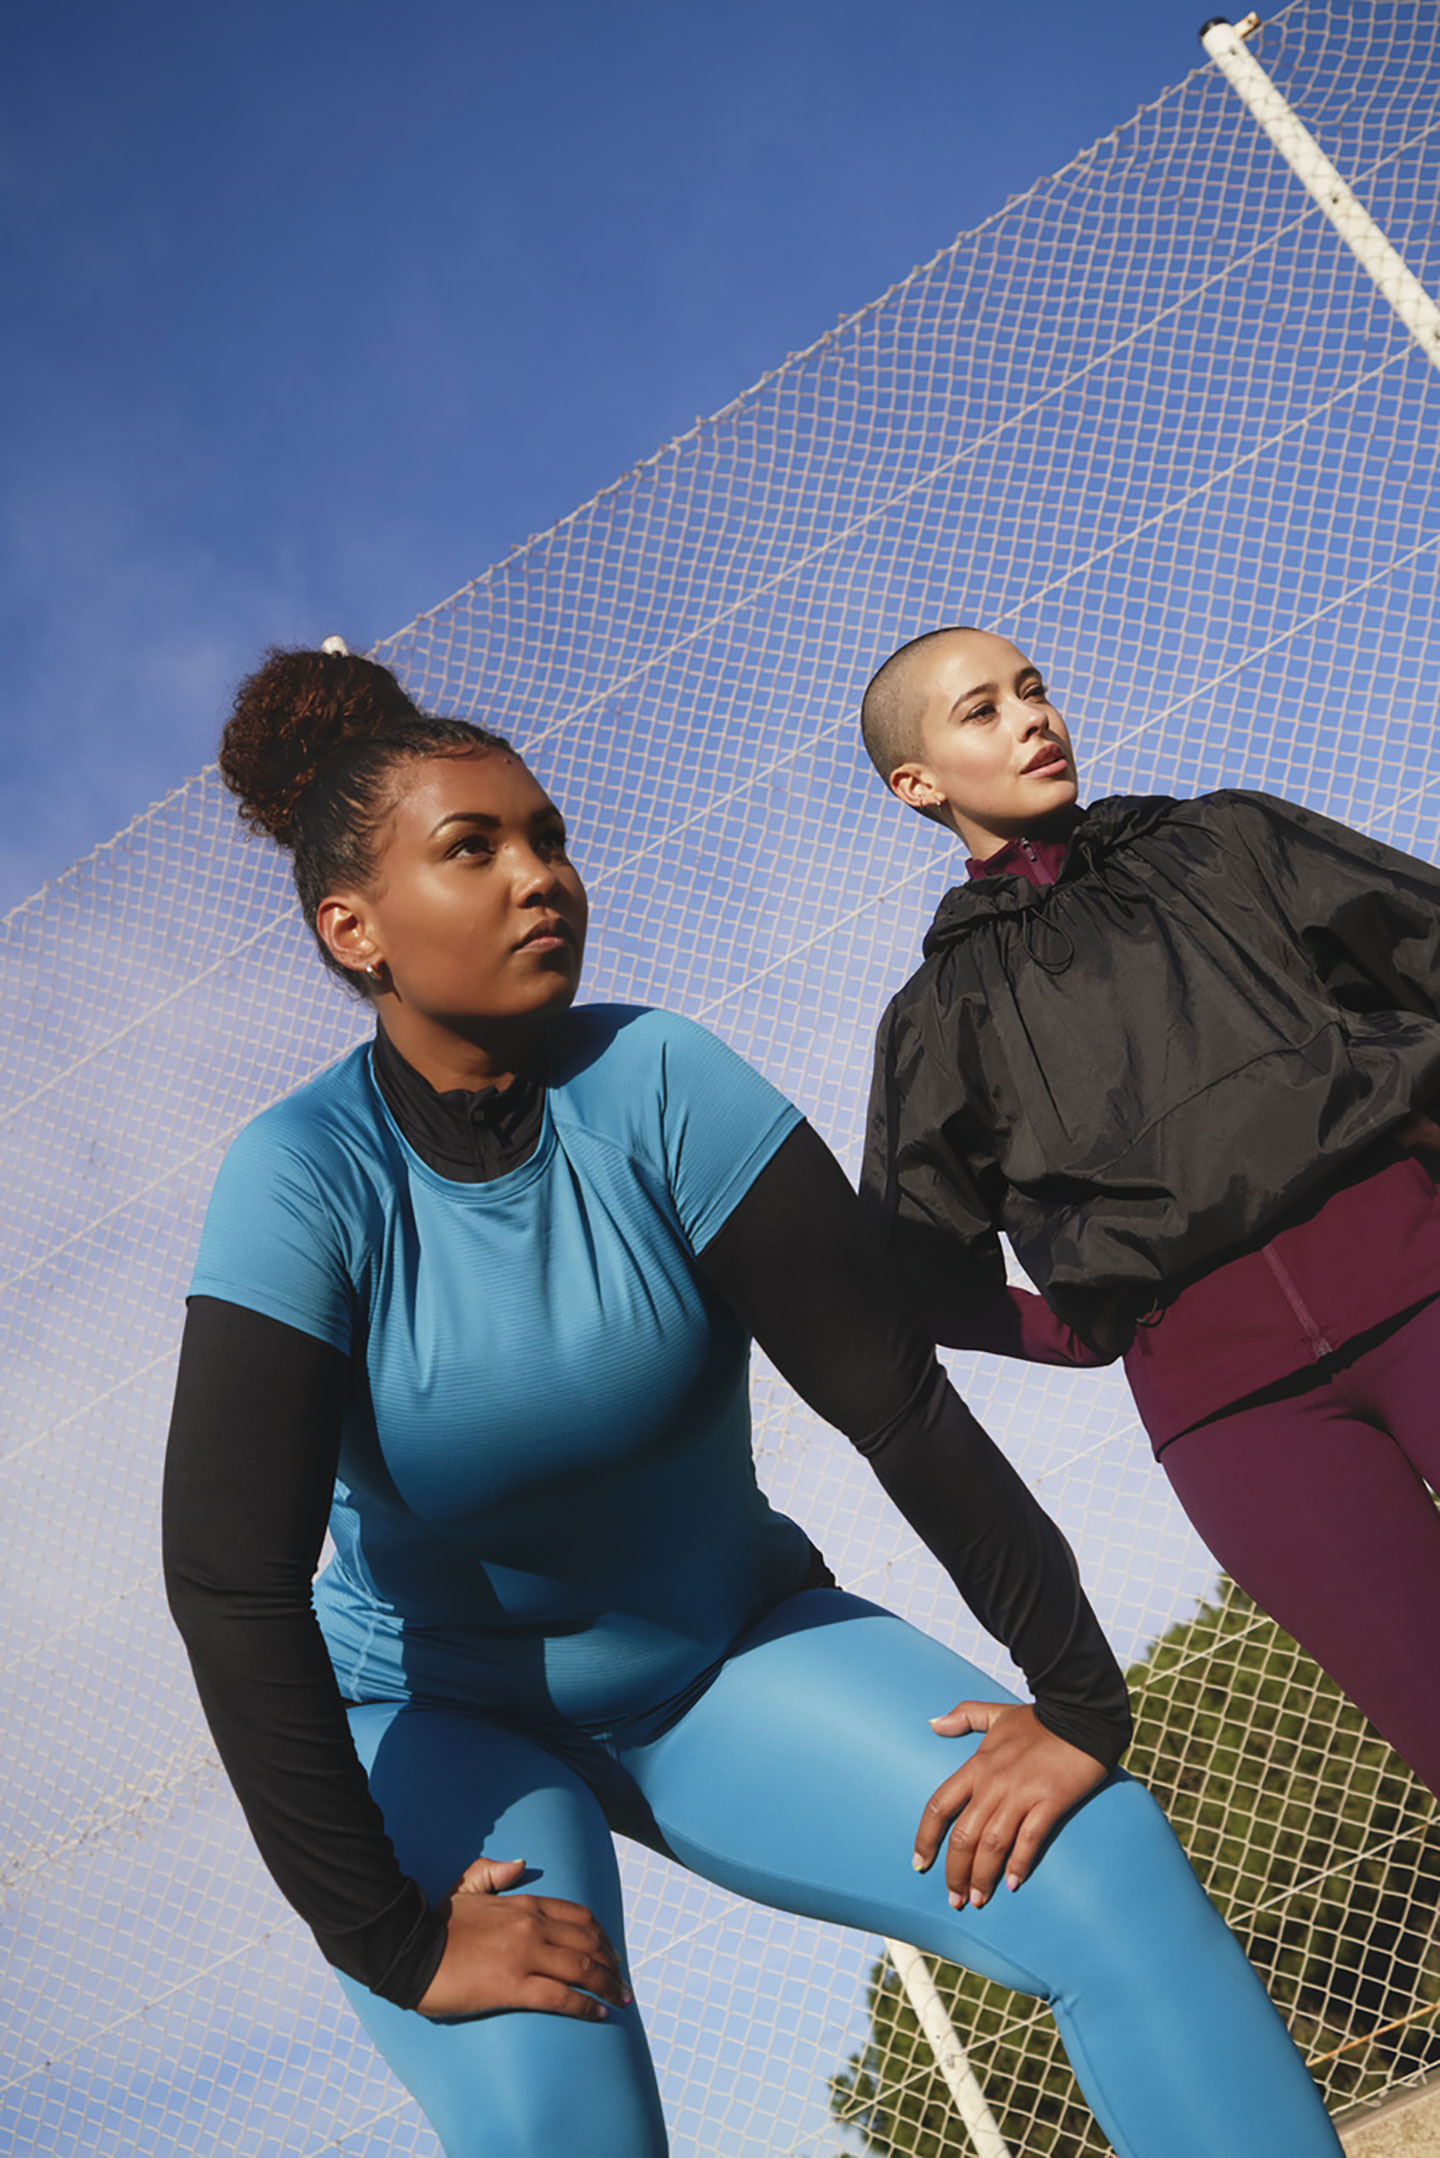 H&M launched its new activewear line with a campaign starring Jane